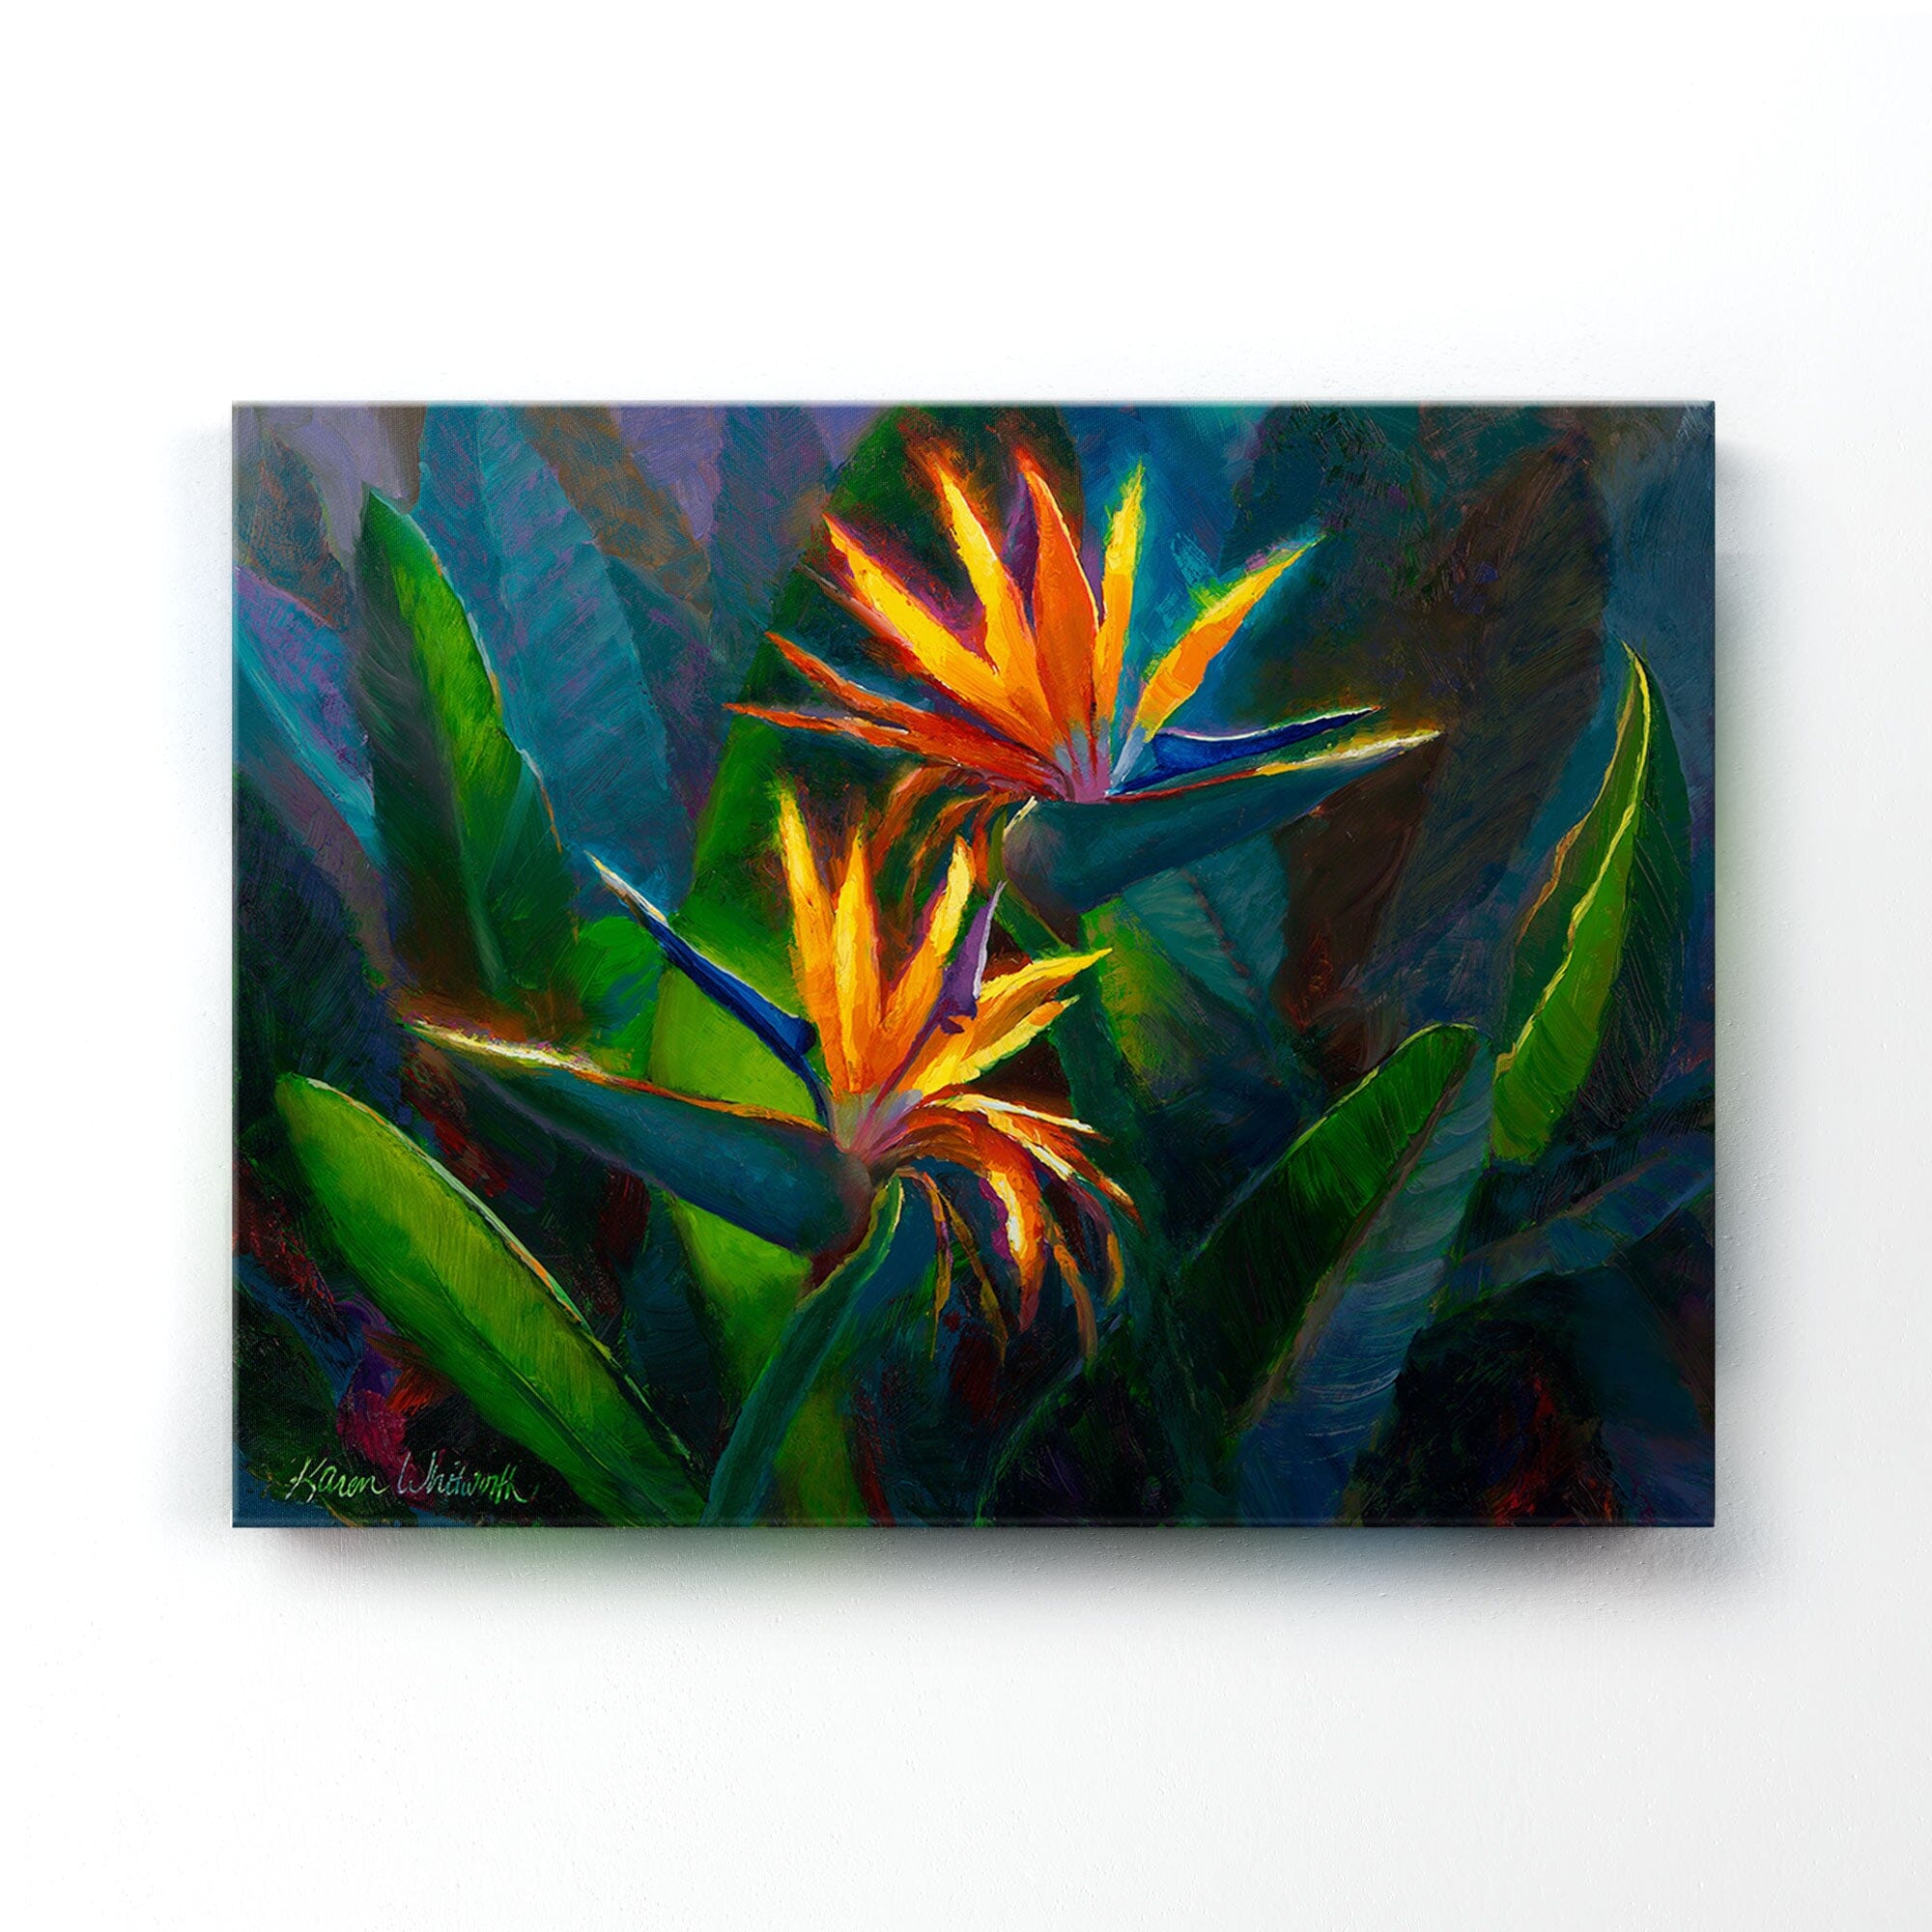 Hawaiian Flower Painting with tropical bird of paradise canvas art print by Hawaii artist Karen Whitworth. The artwork is unframed and hanging on a white wall. 